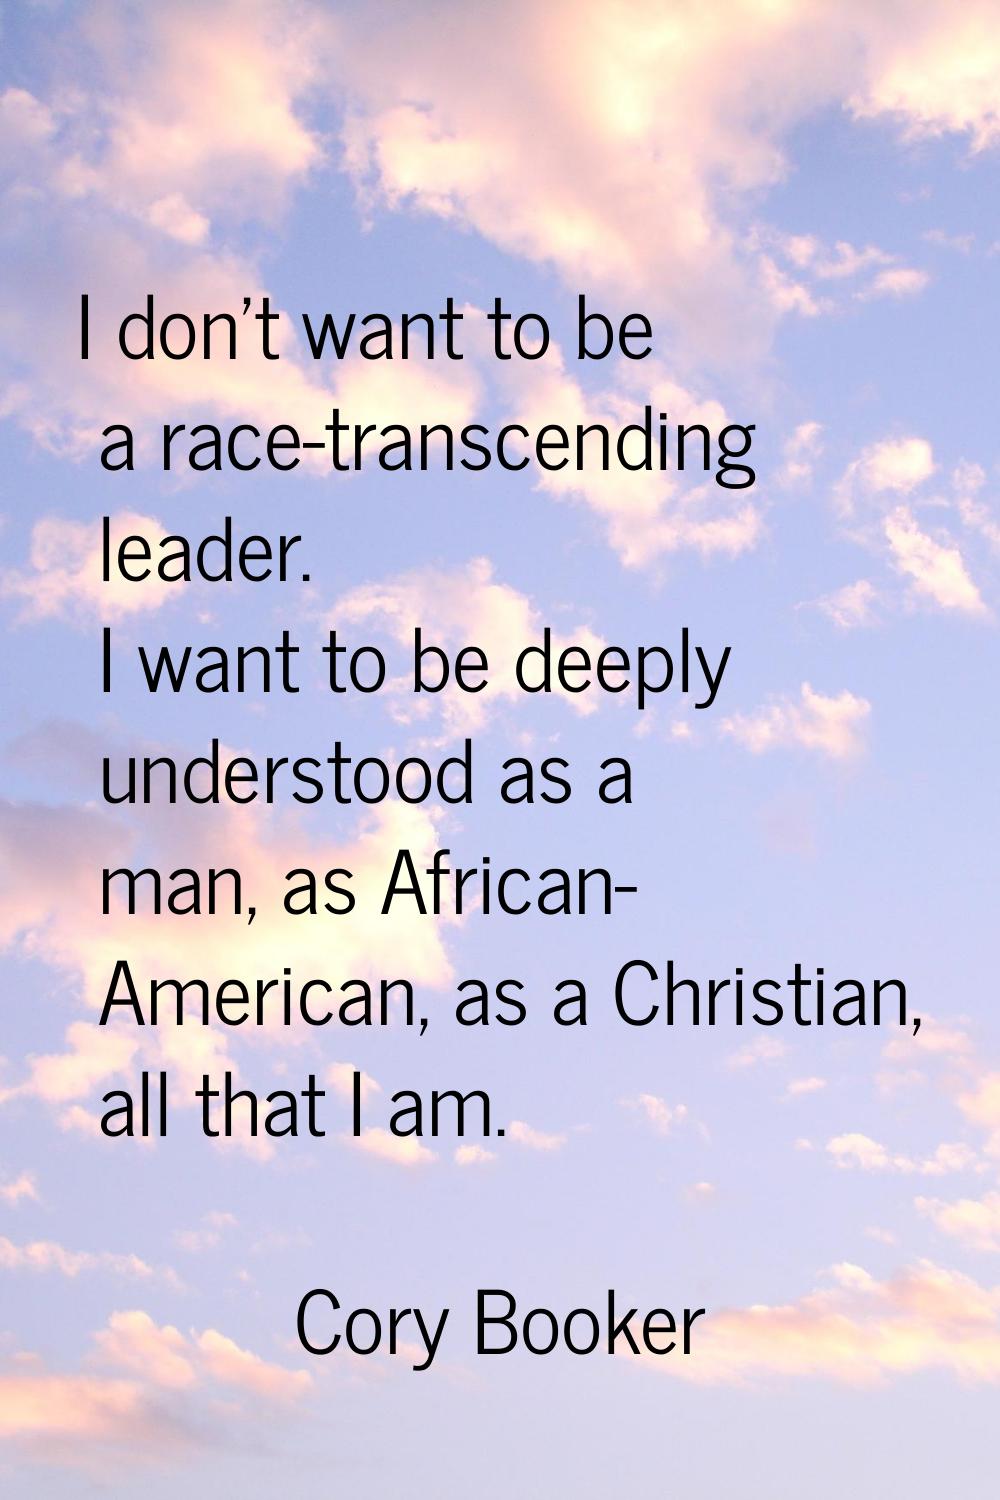 I don't want to be a race-transcending leader. I want to be deeply understood as a man, as African-